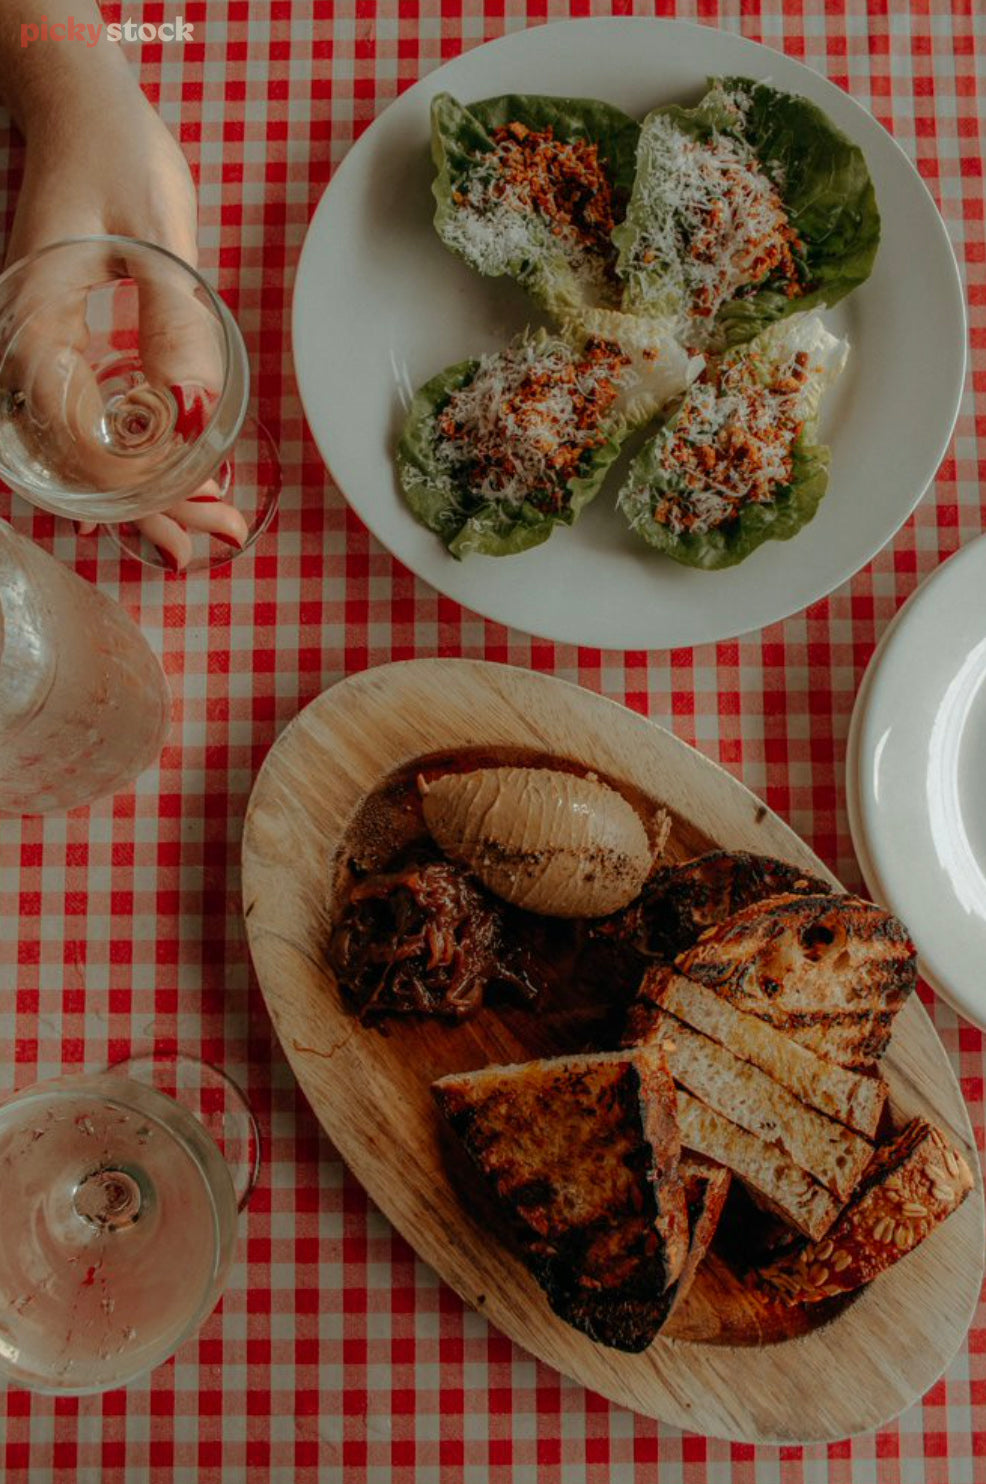 Birds-eye-view image of a plated up meal at a New Zealand restaurant. The restaurant food sits on a red and white checked tablecloth, with a hand holding a glass of white wine. 